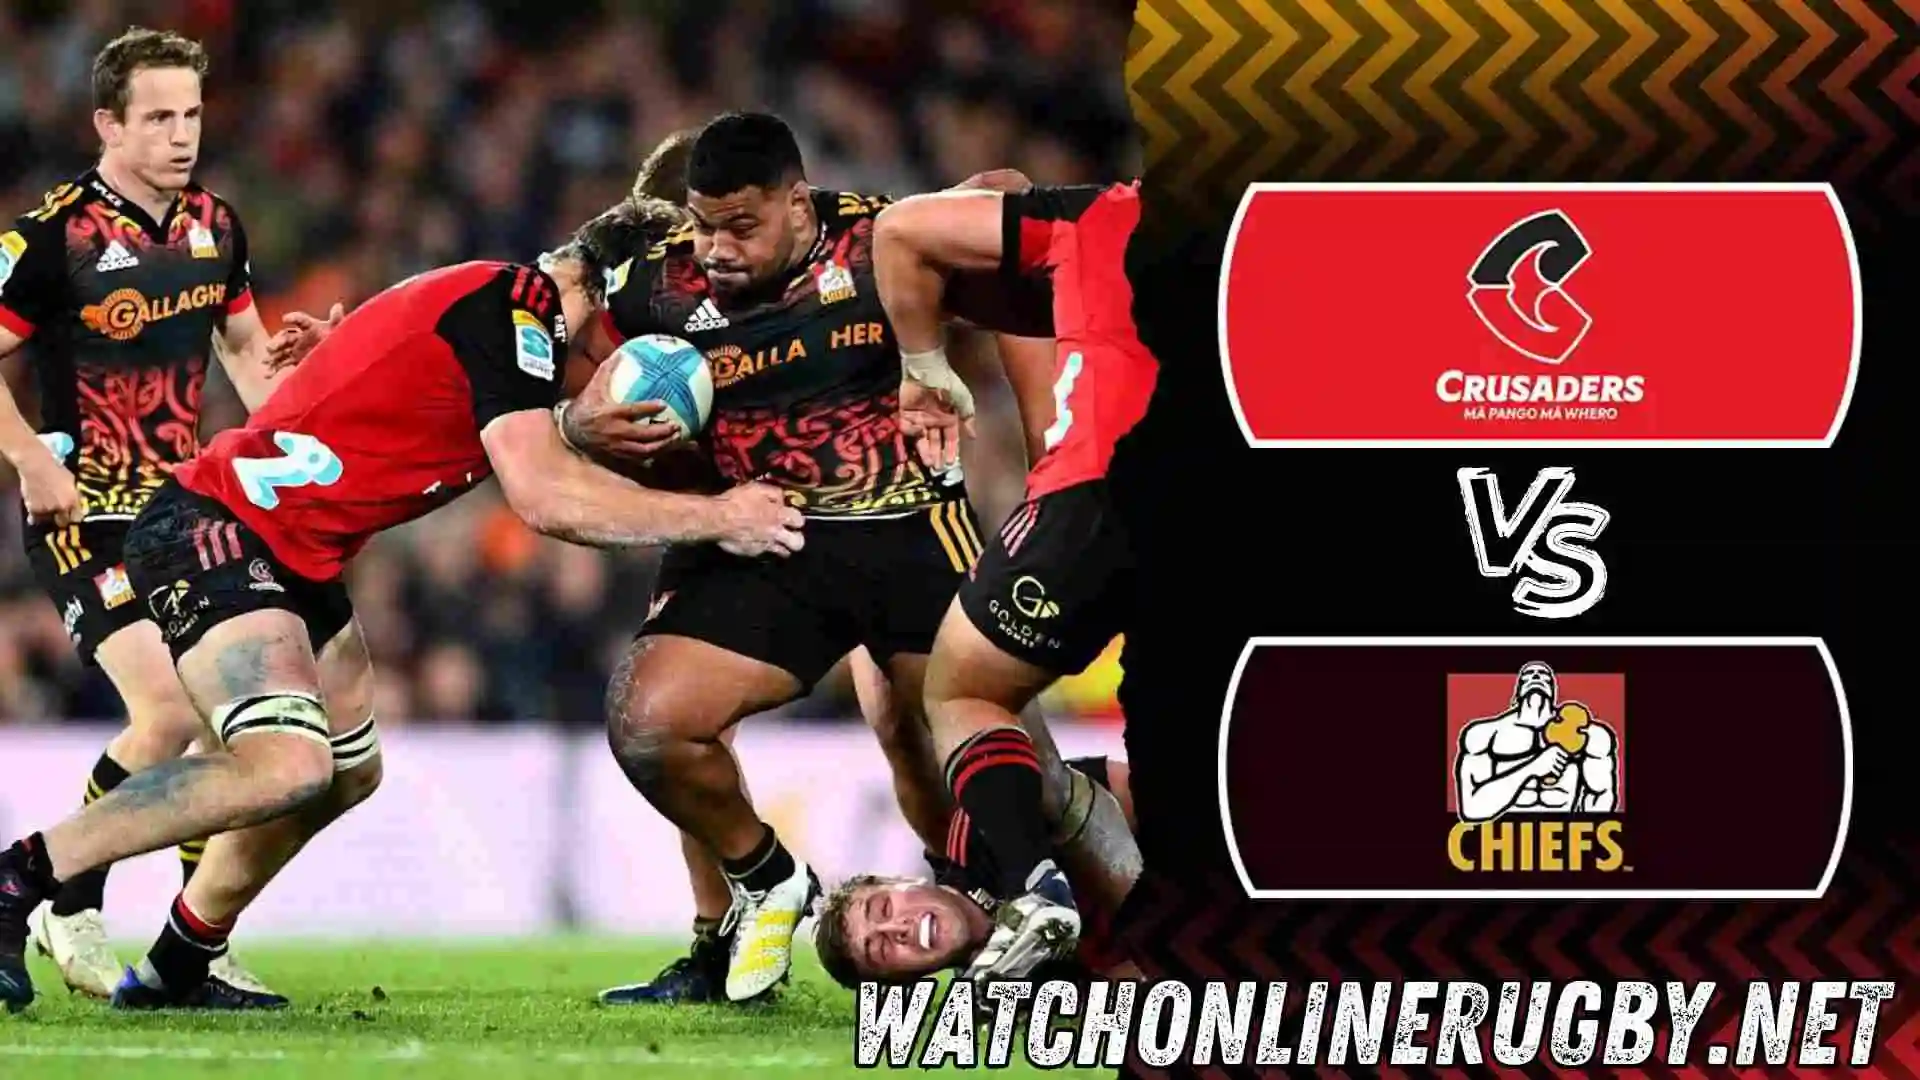 Chiefs VS Crusaders Live Streaming